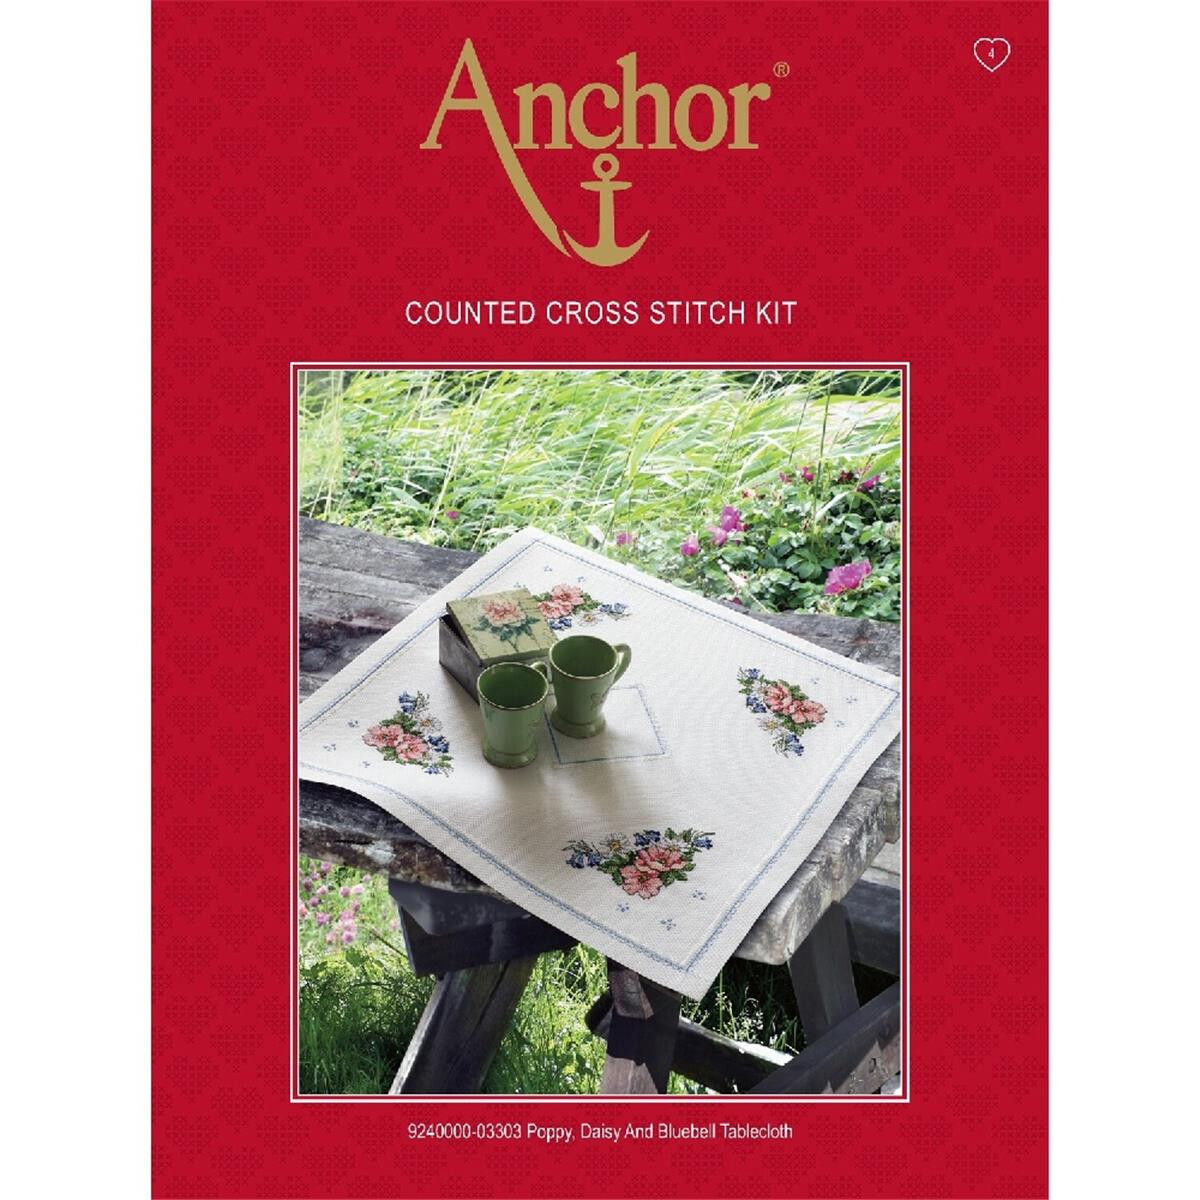 Anchor counted Cross Stitch kit Tablecloth "Sweet...